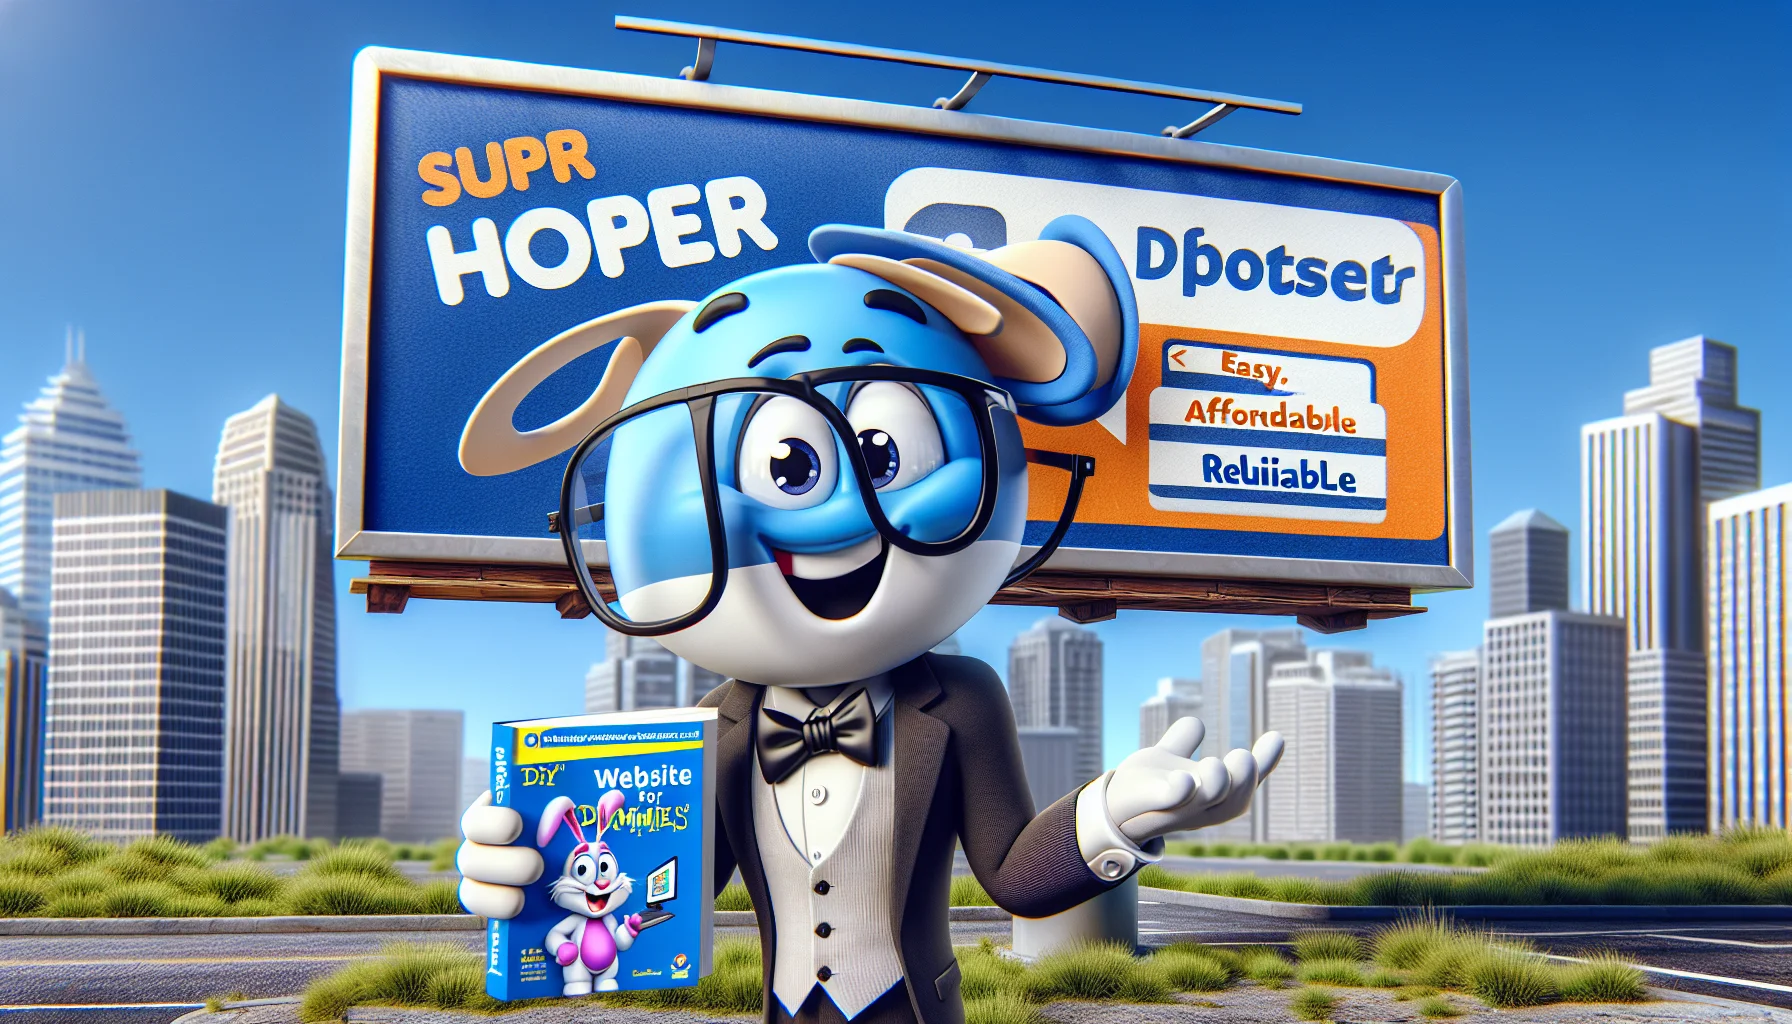 Create a humorous and vibrant digital image showing a blue and white smiling website mascot (let's call him Webby!) enthusiastically promoting web hosting services. Let Webby point to a billboard with the text 'Superhost: Easy, Affordable, Reliable' under a DIY website icon symbolising user-friendly interface. A confused novice web-designer rabbit in a surprisingly formal attire (suit and glasses) is comically nodding off with a 'Website Building for Dummies' book in paws. Make sure to capture a sense of fun and lightheartedness in the image.